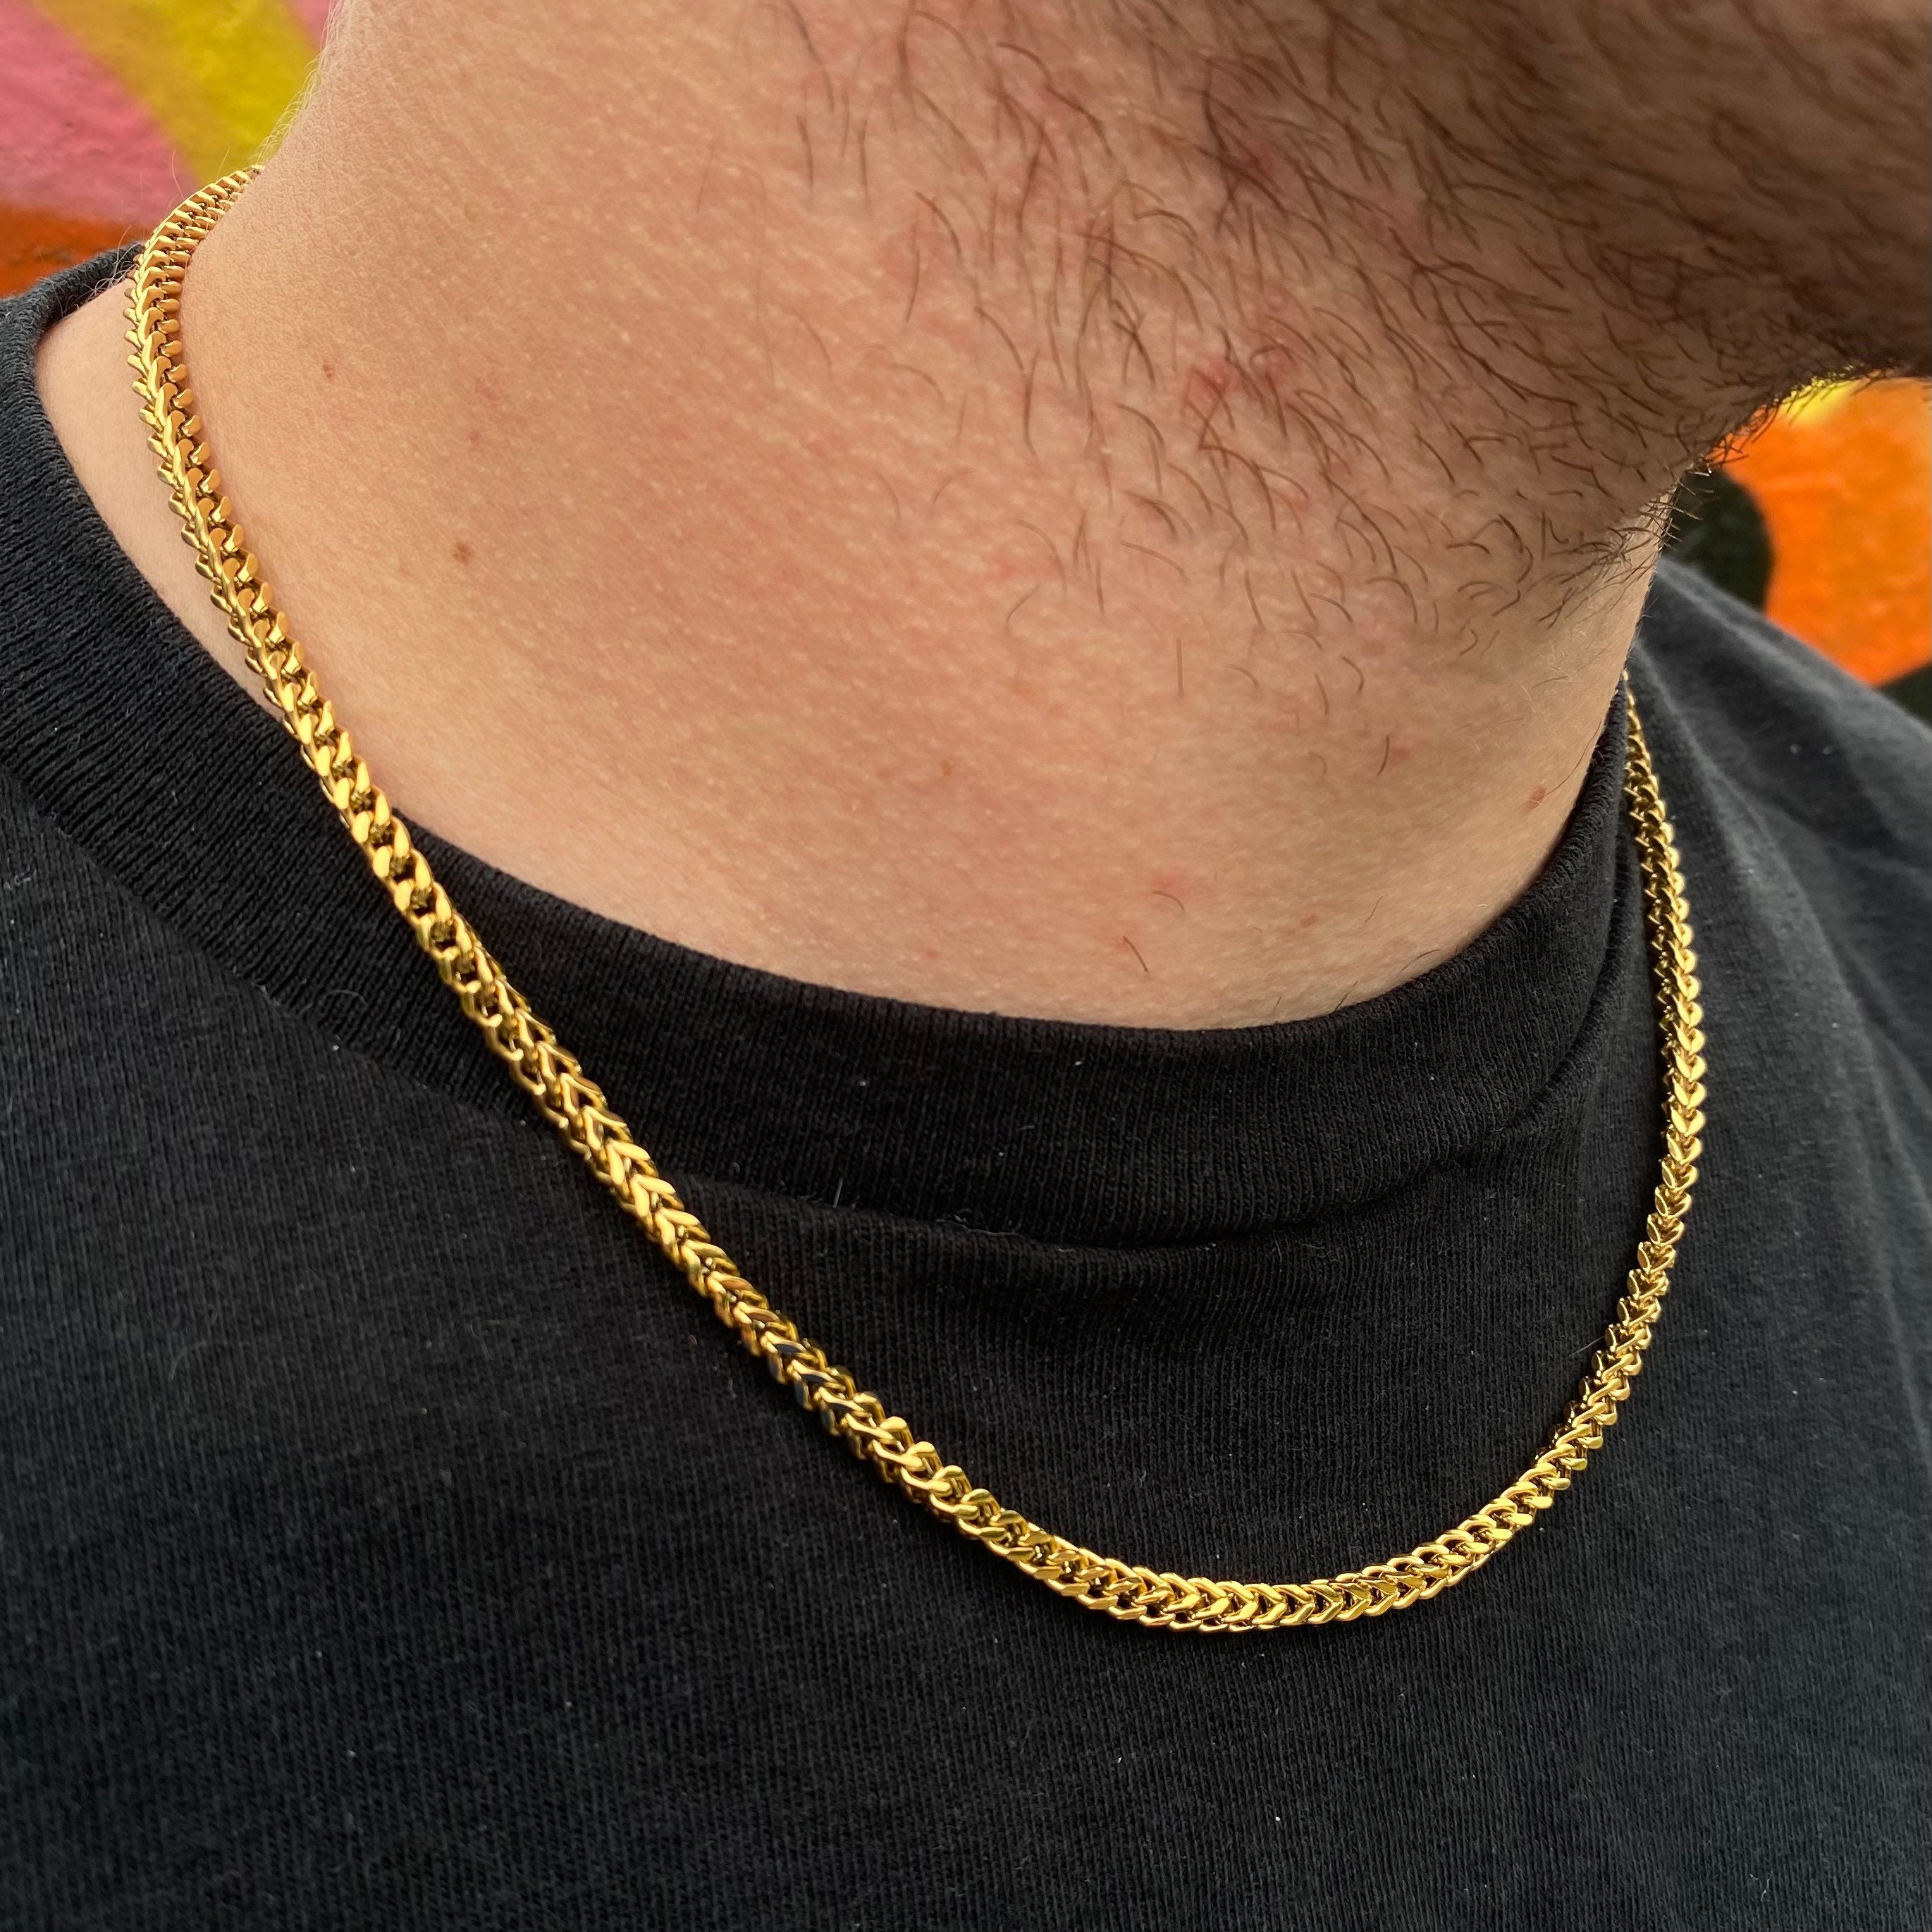 Gold Chain Necklace Mens Chain Franco 4mm Mens Gold Chain | Etsy